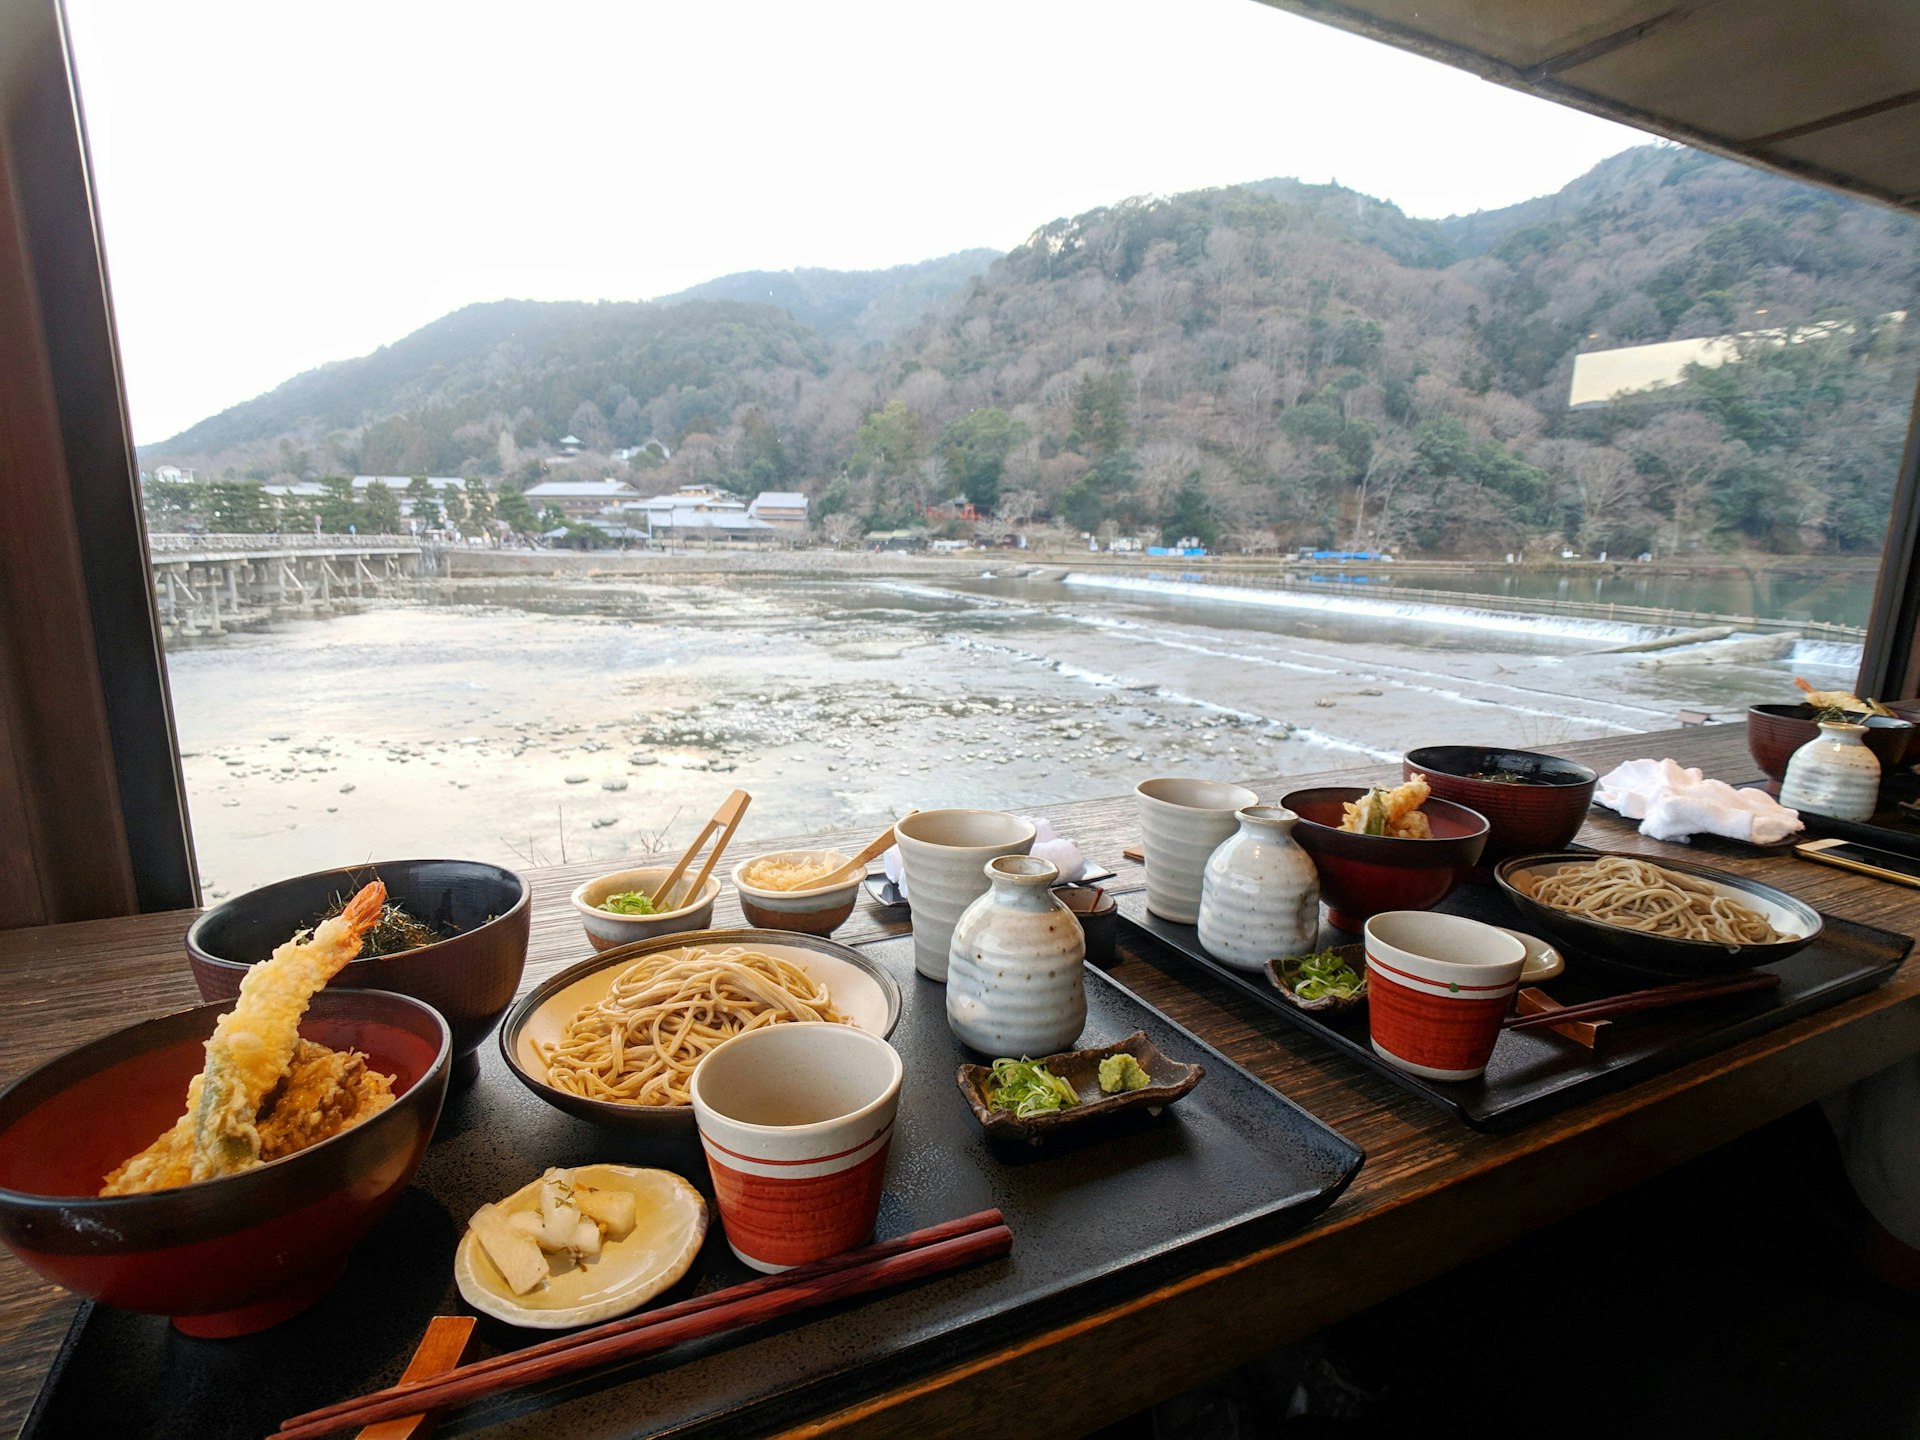 Two trays of food placed at a window seat in a restaurant with a river view